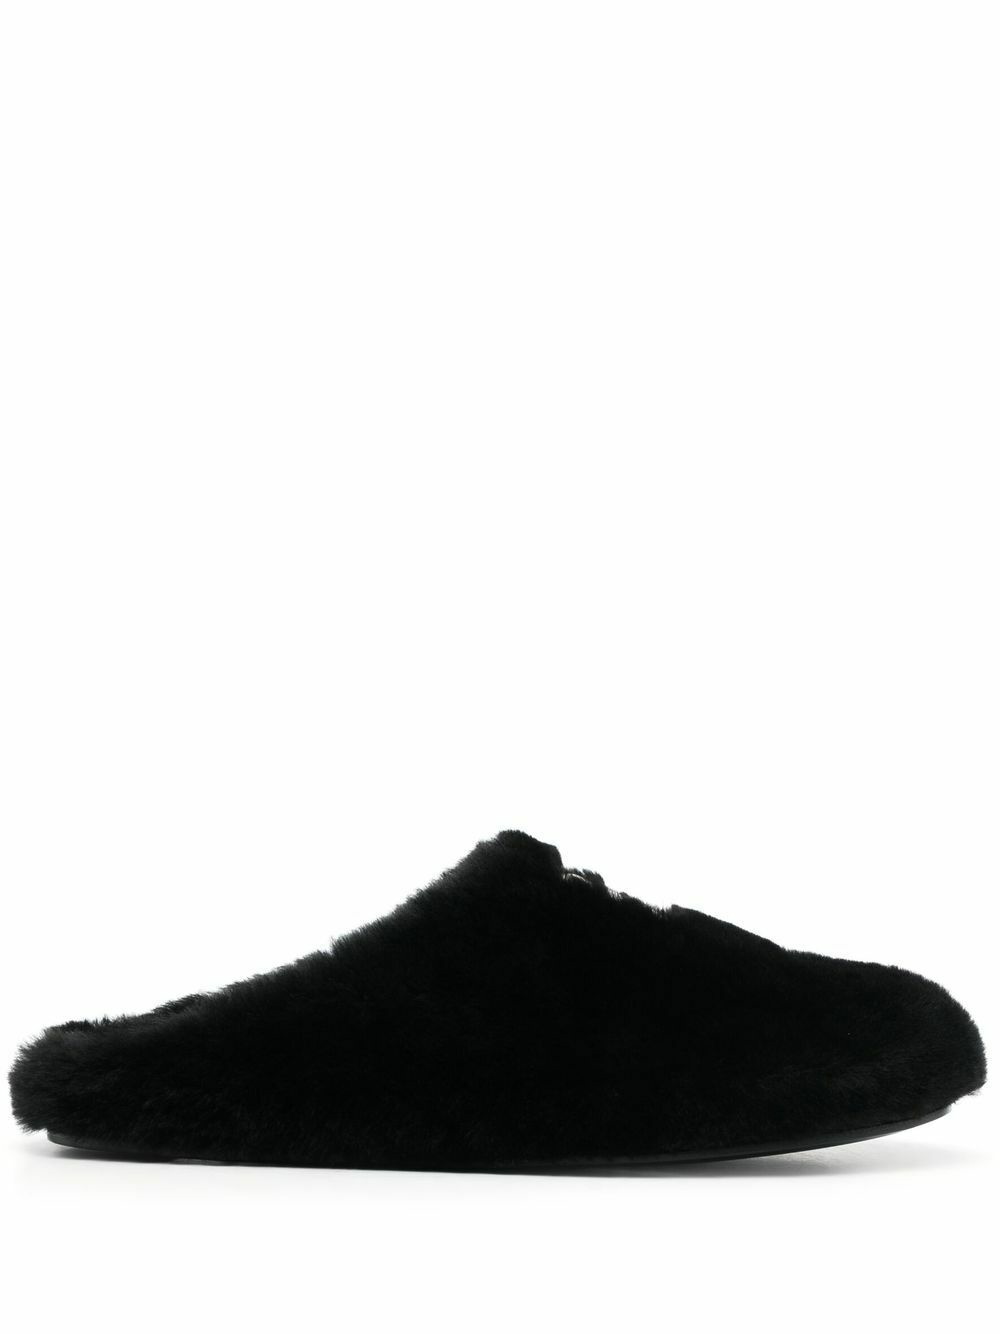 Givenchy Black Shearling Monogram Slippers In 001 Black